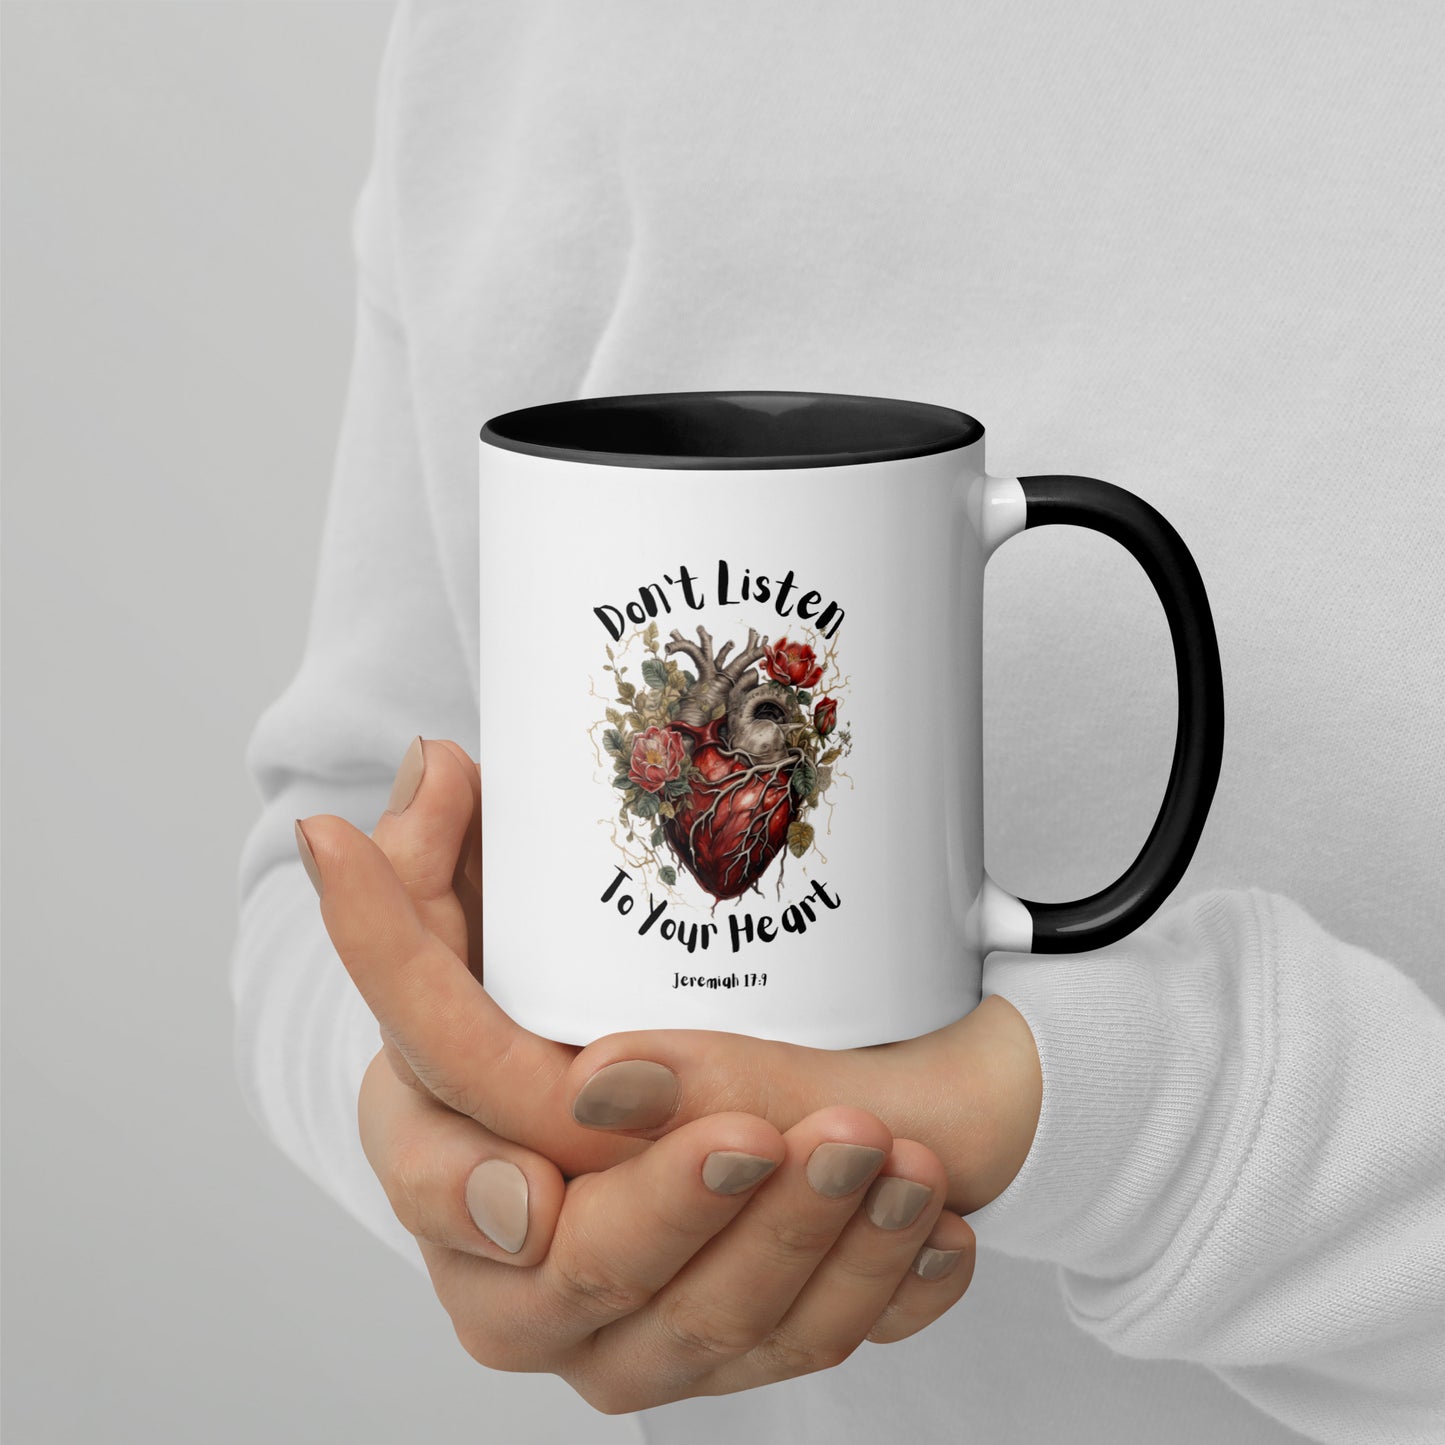 Don't Listen to Your Heart - Mug